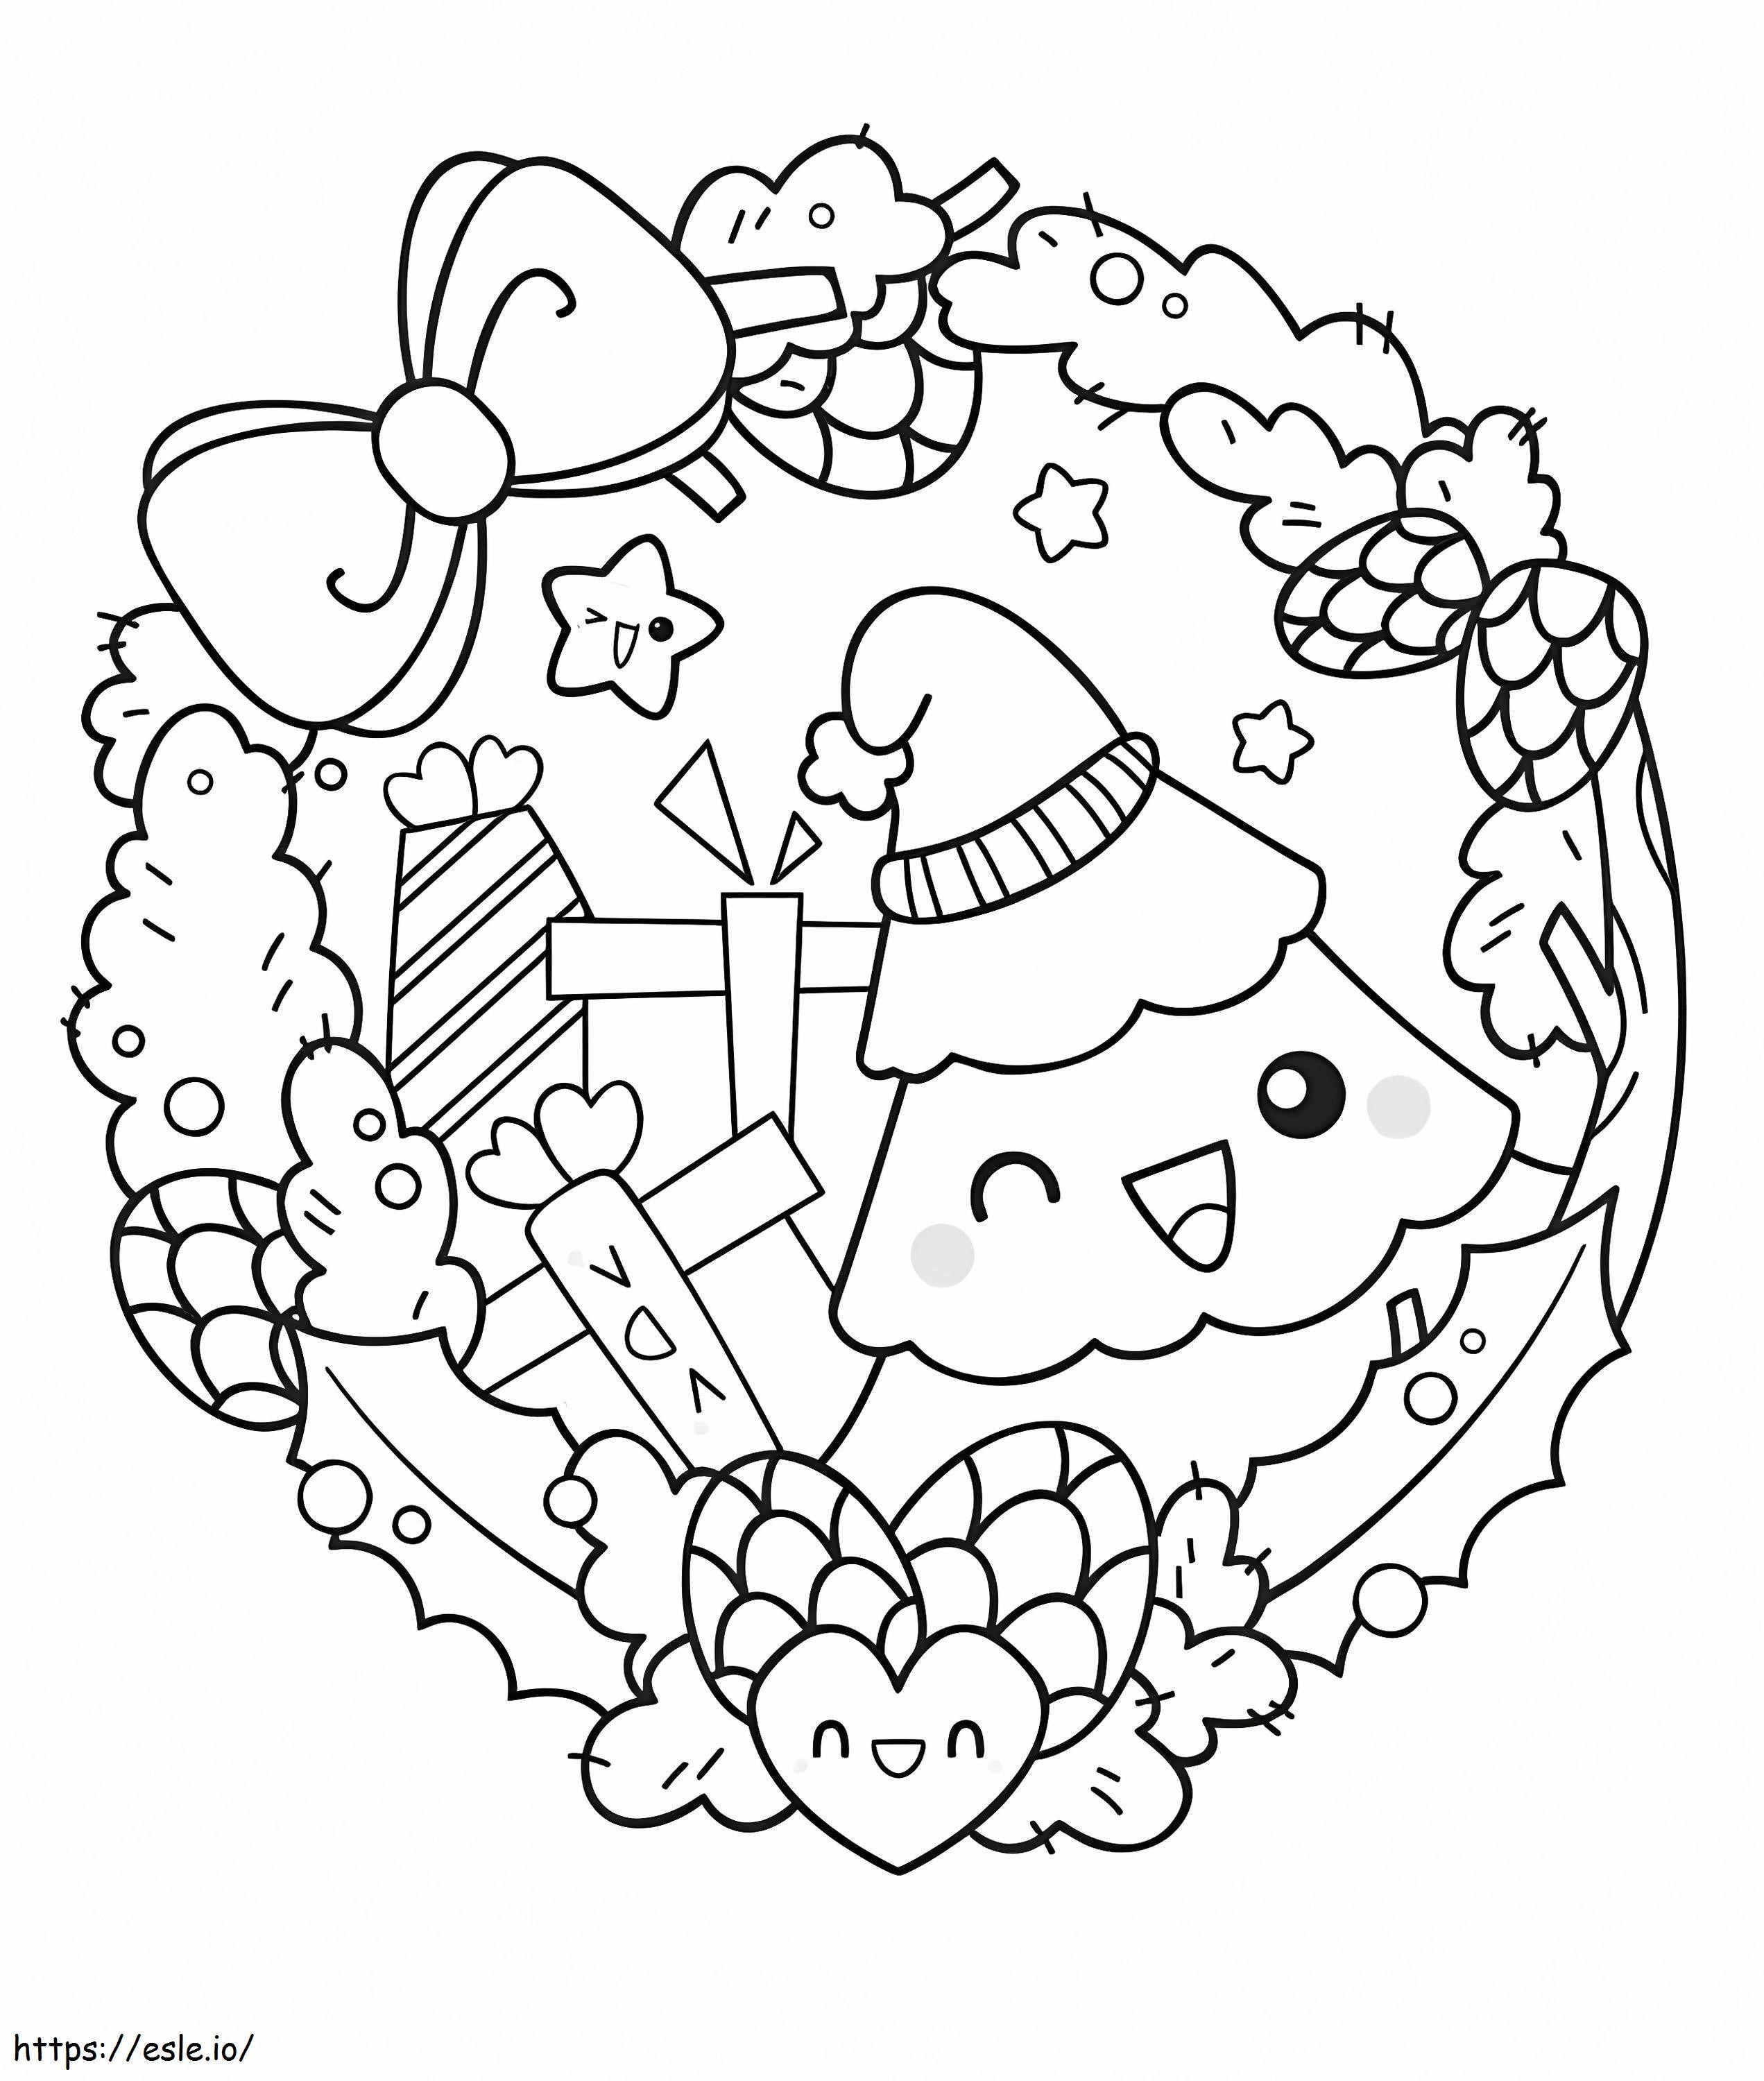 Cute Christmas Wreath coloring page